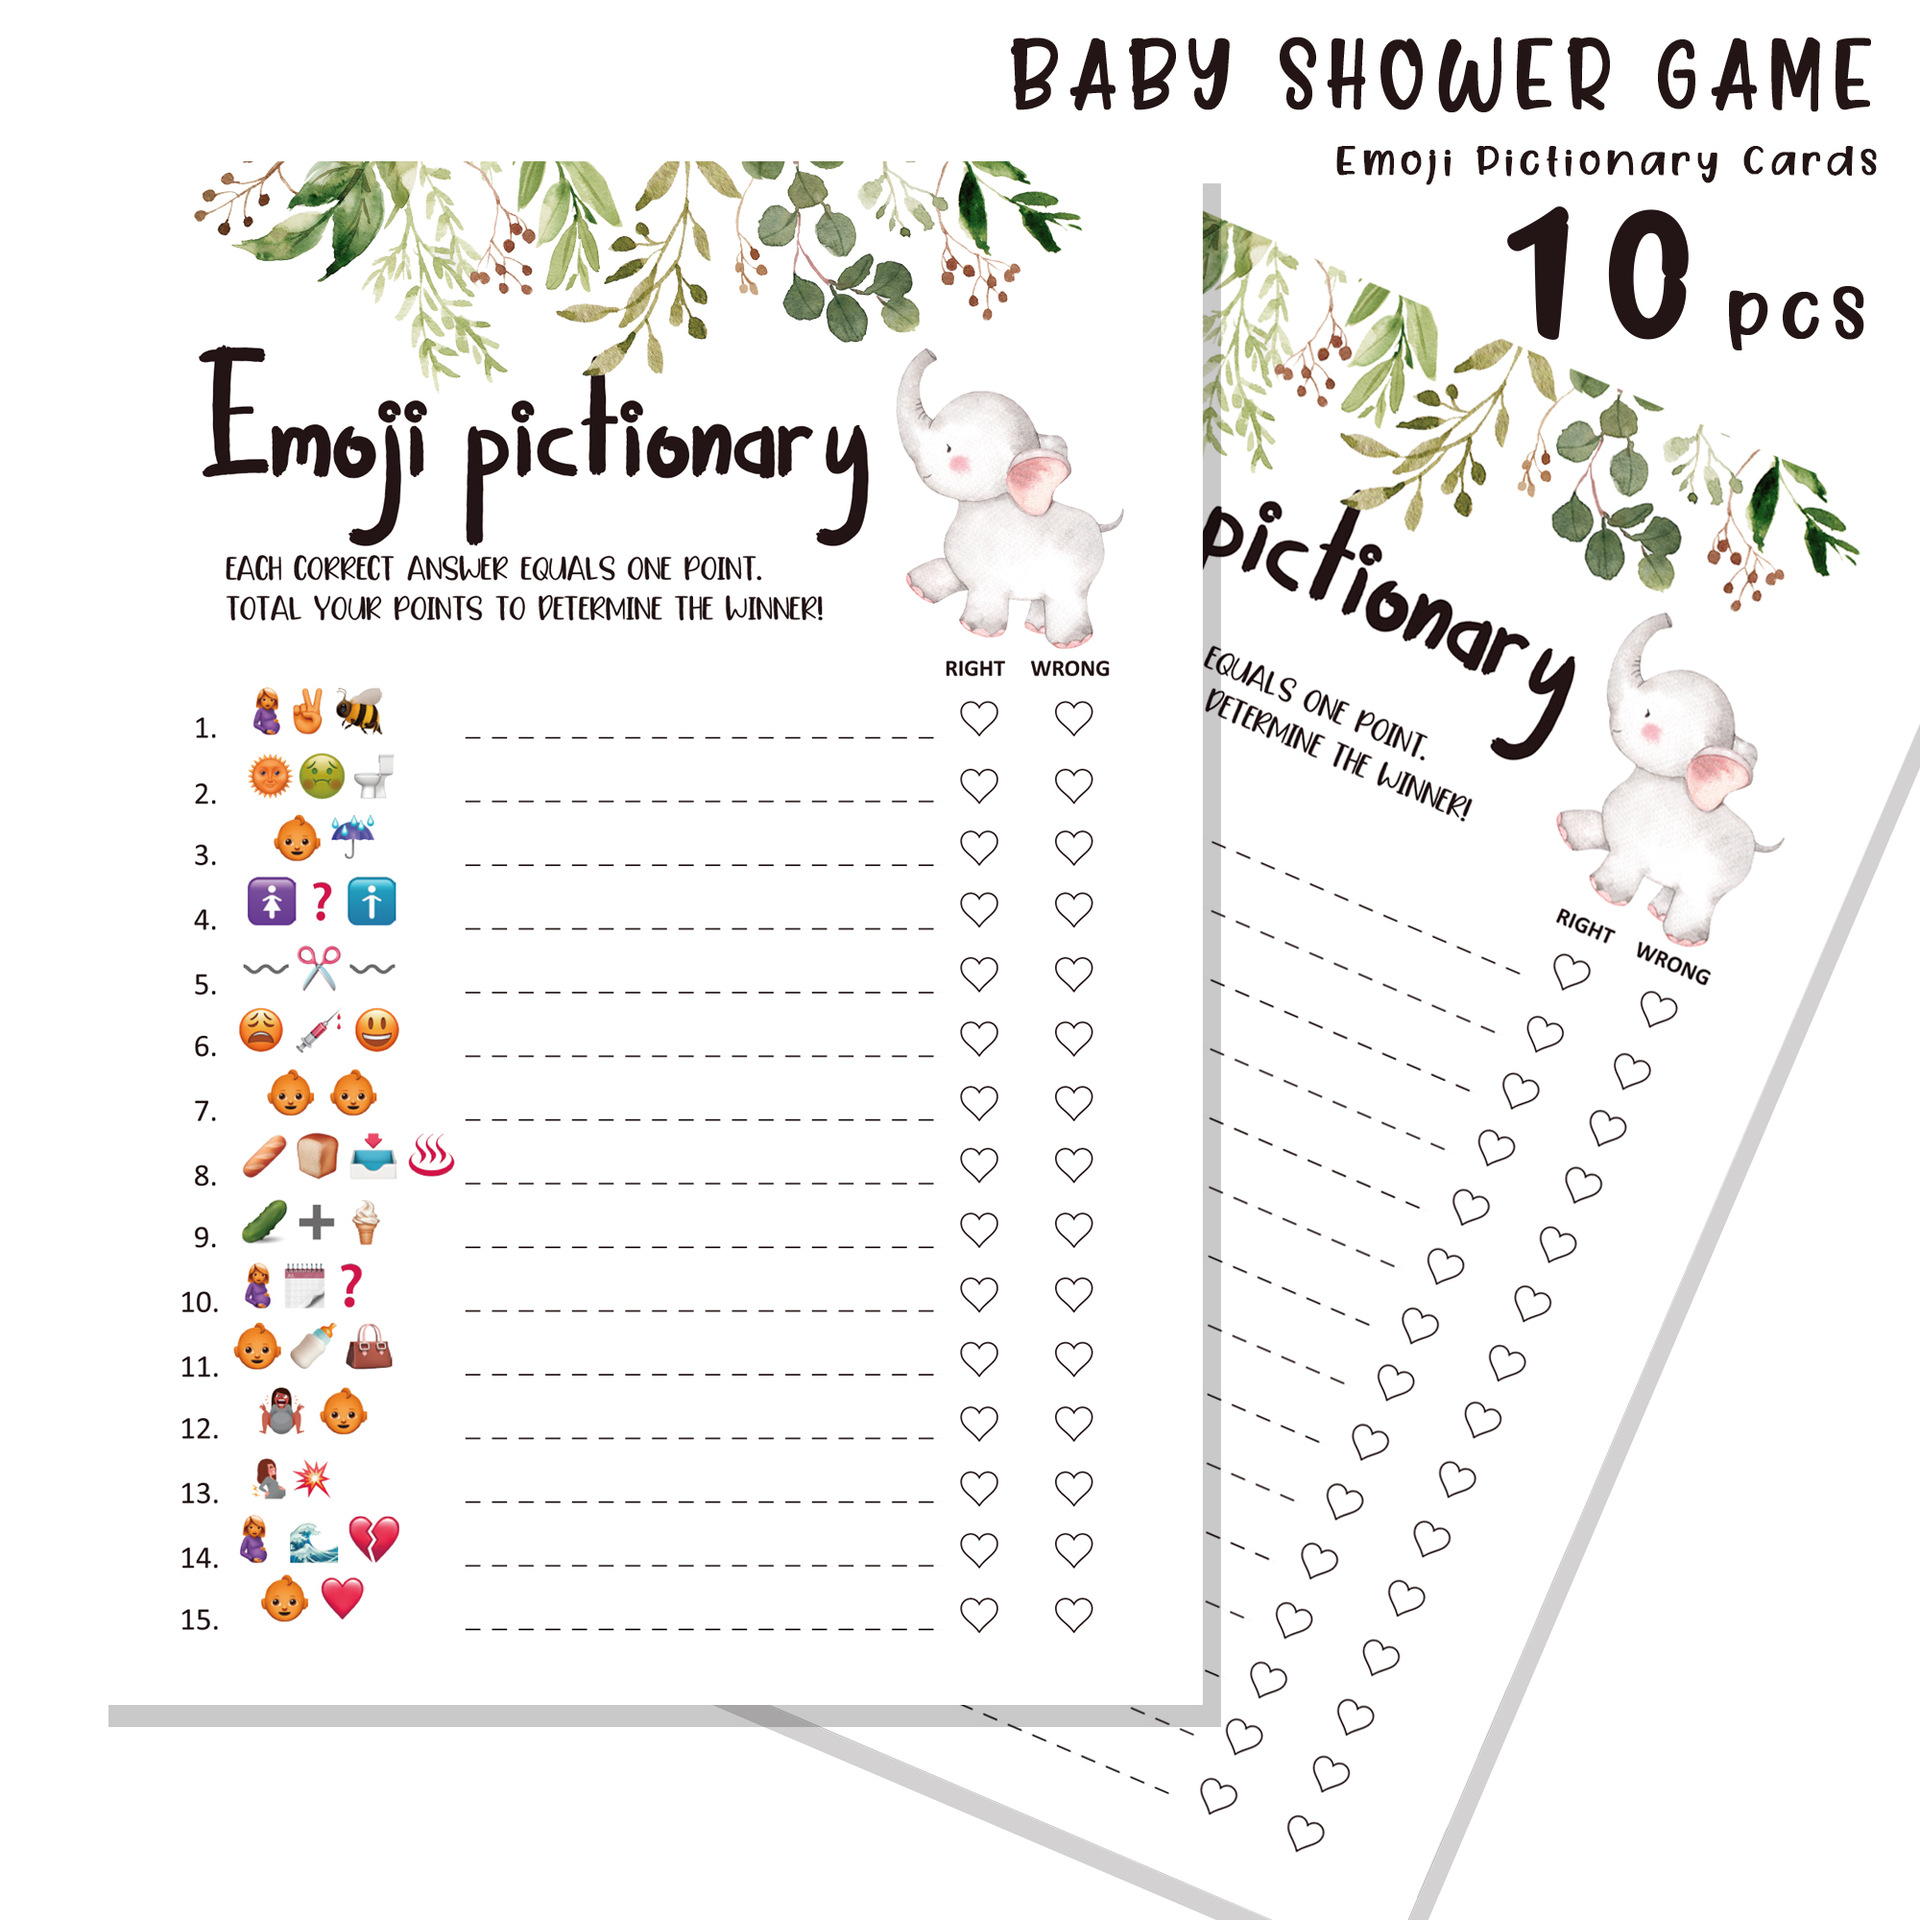 Baby Shower Emoji Pictionary Game Card Pack of 10